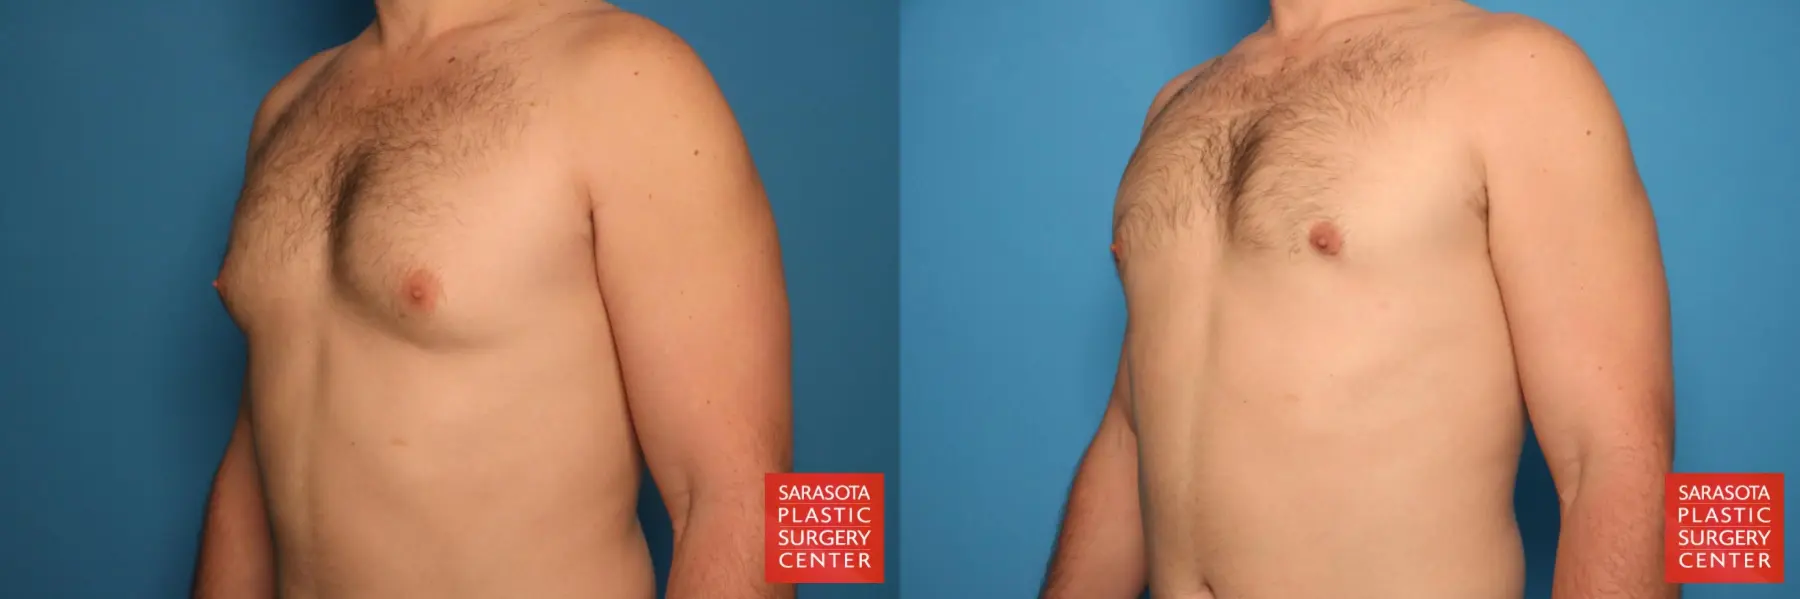 Gynecomastia: Patient 4 - Before and After 2